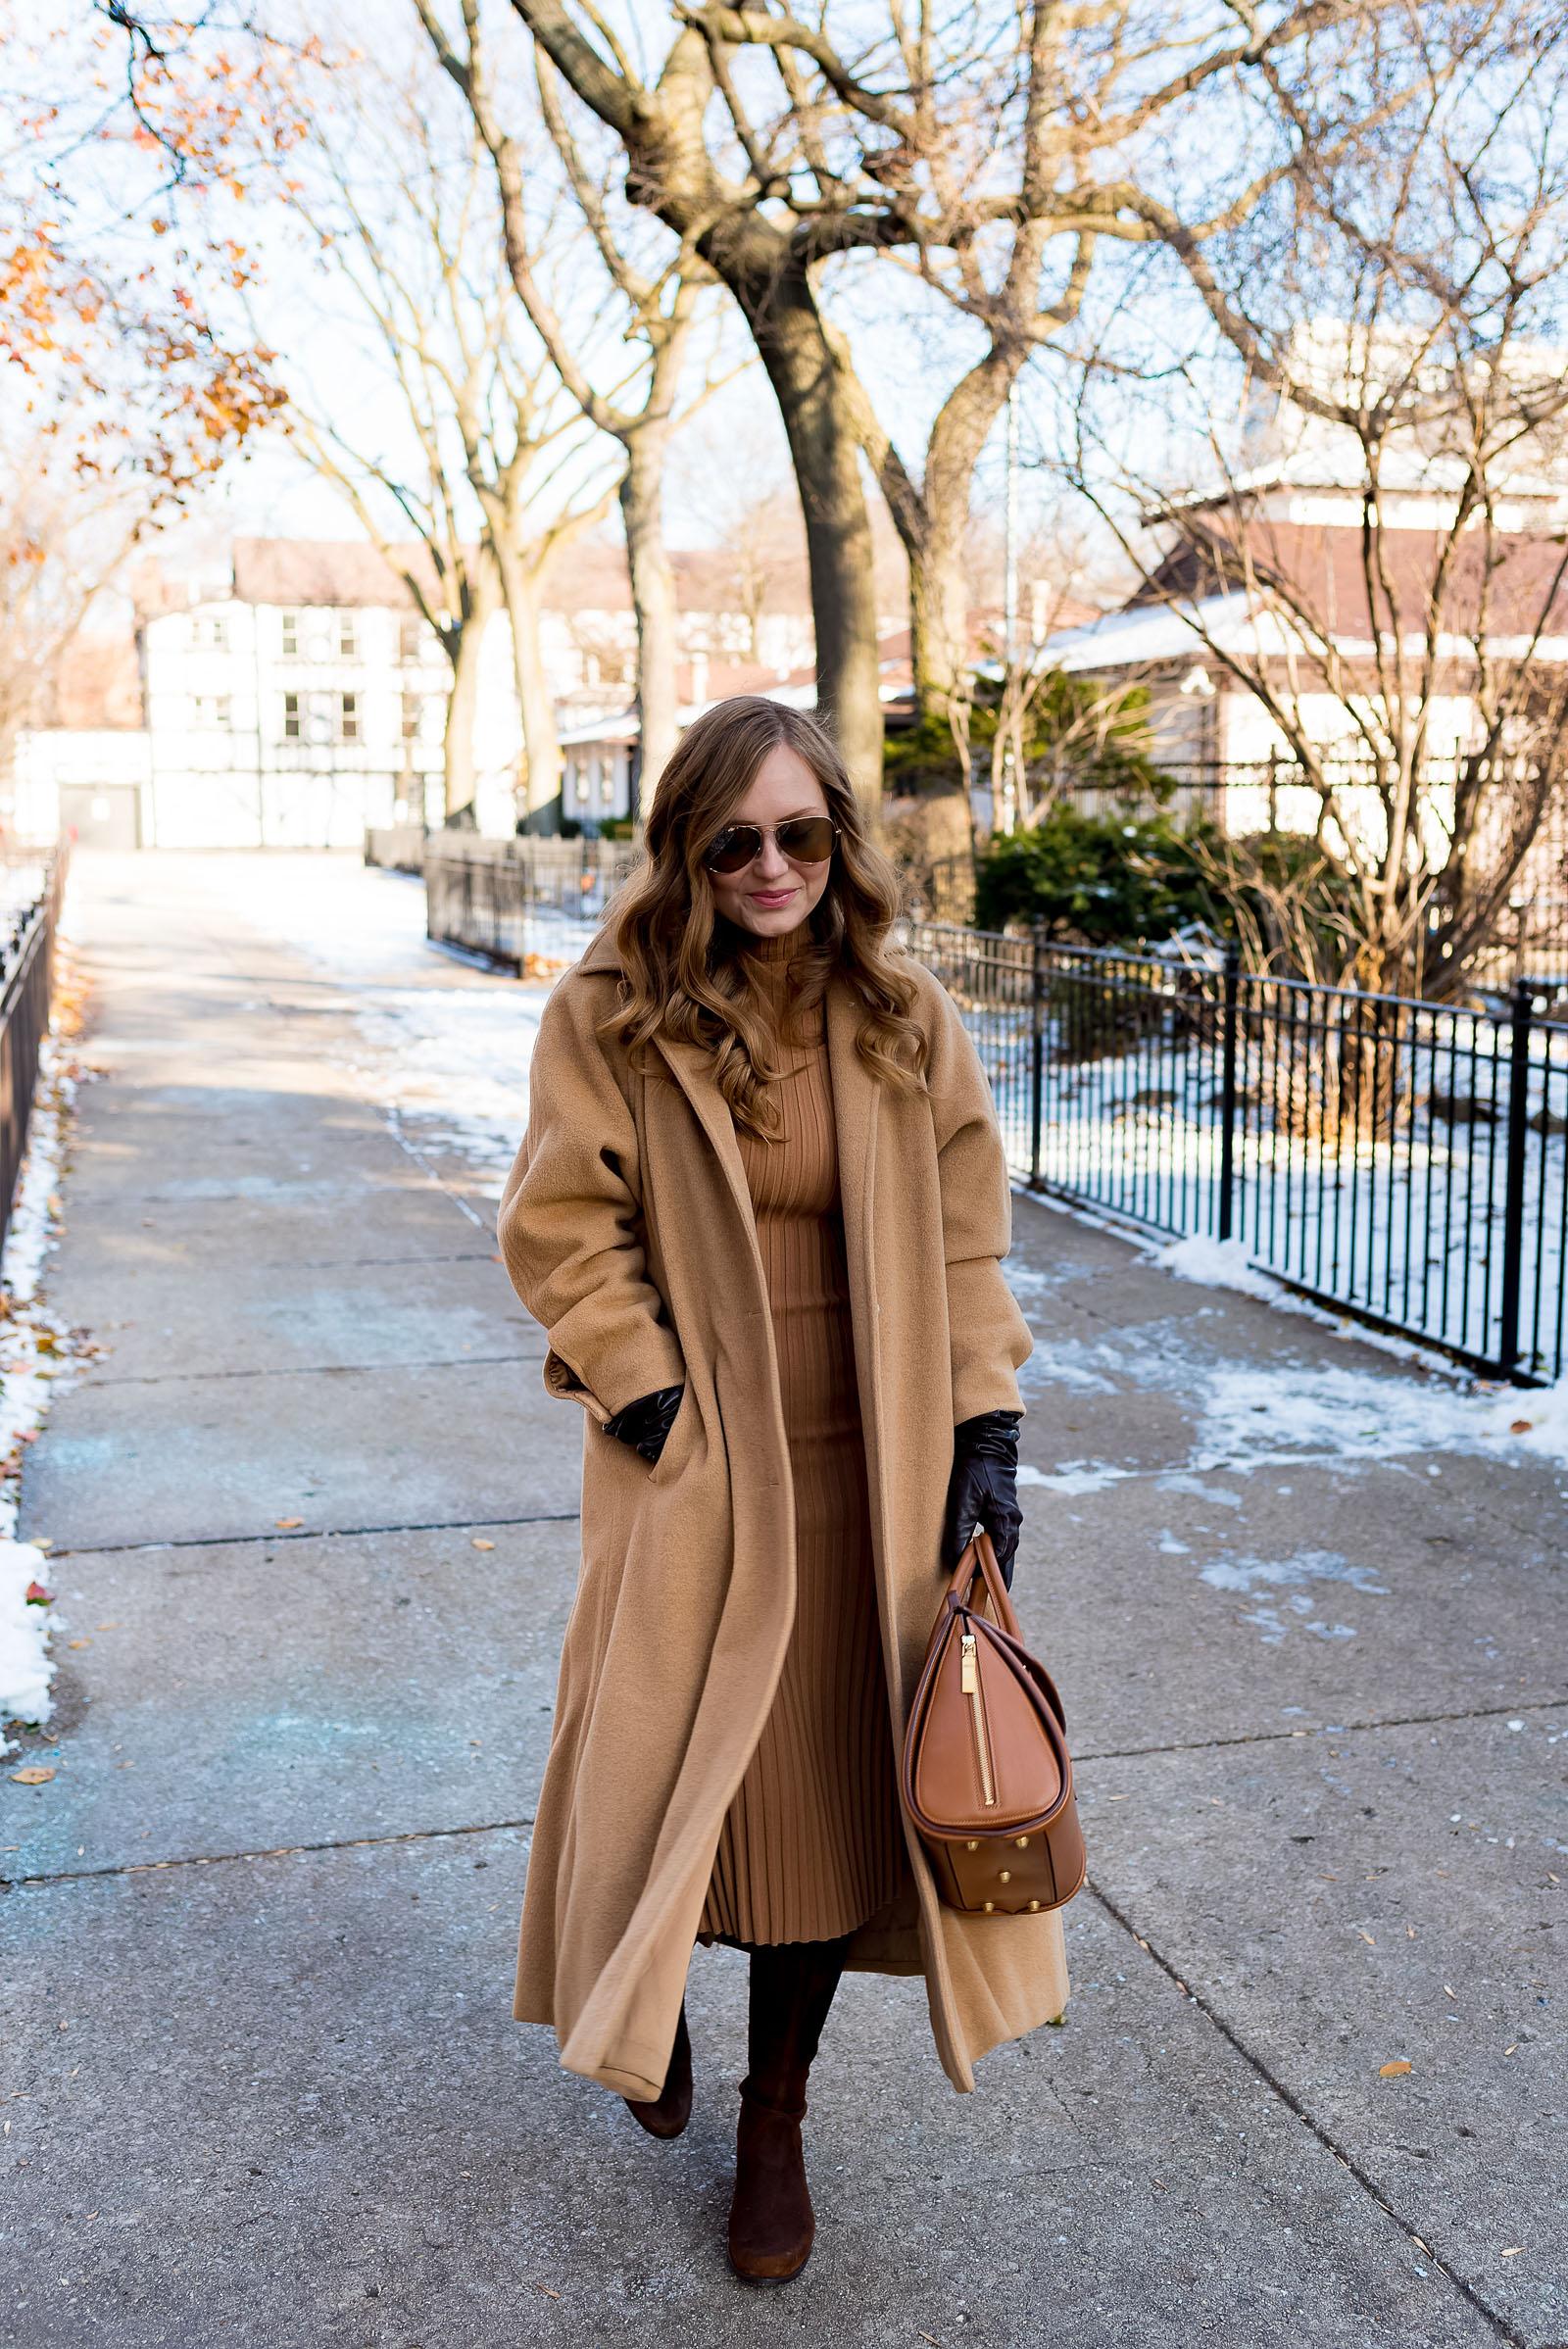 Vintage Tan & Camel Winter Outfit